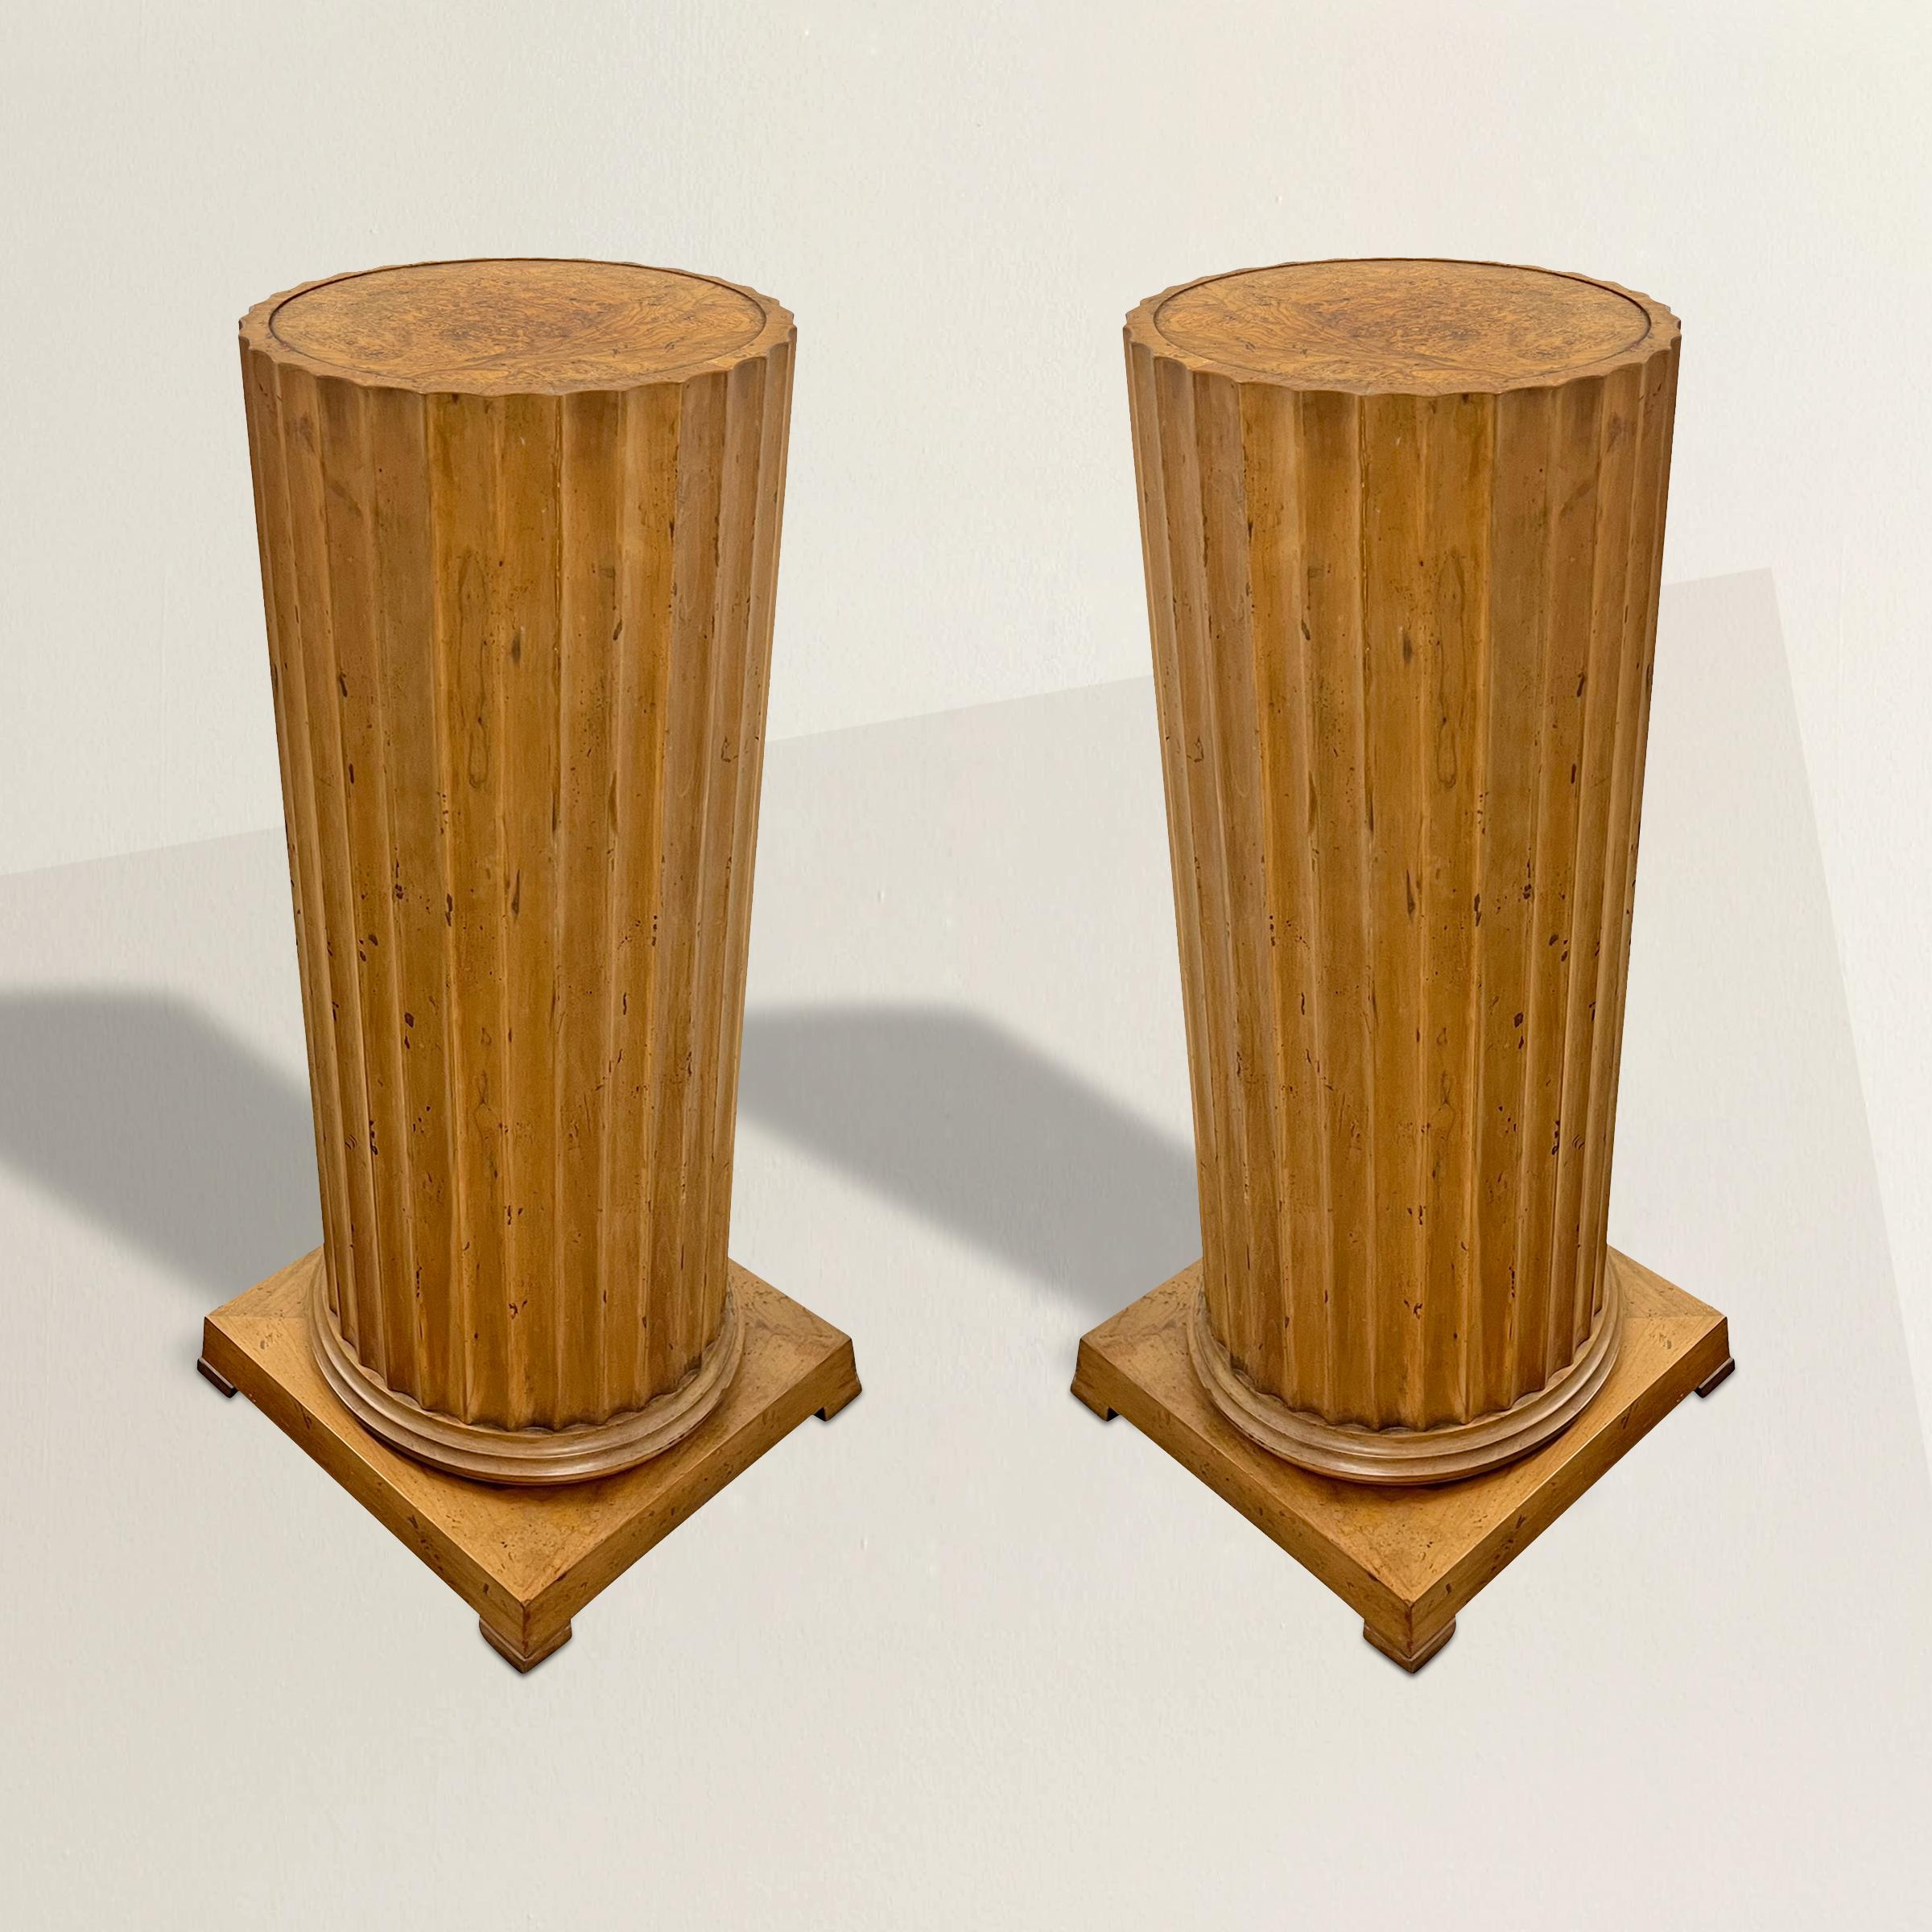 Indulge in the timeless allure of these 20th-century maple pedestals, meticulously crafted to pay homage to the enduring grace of Classical design. With their fluted columns rising from four square feet, and burled maple tops, these pedestals